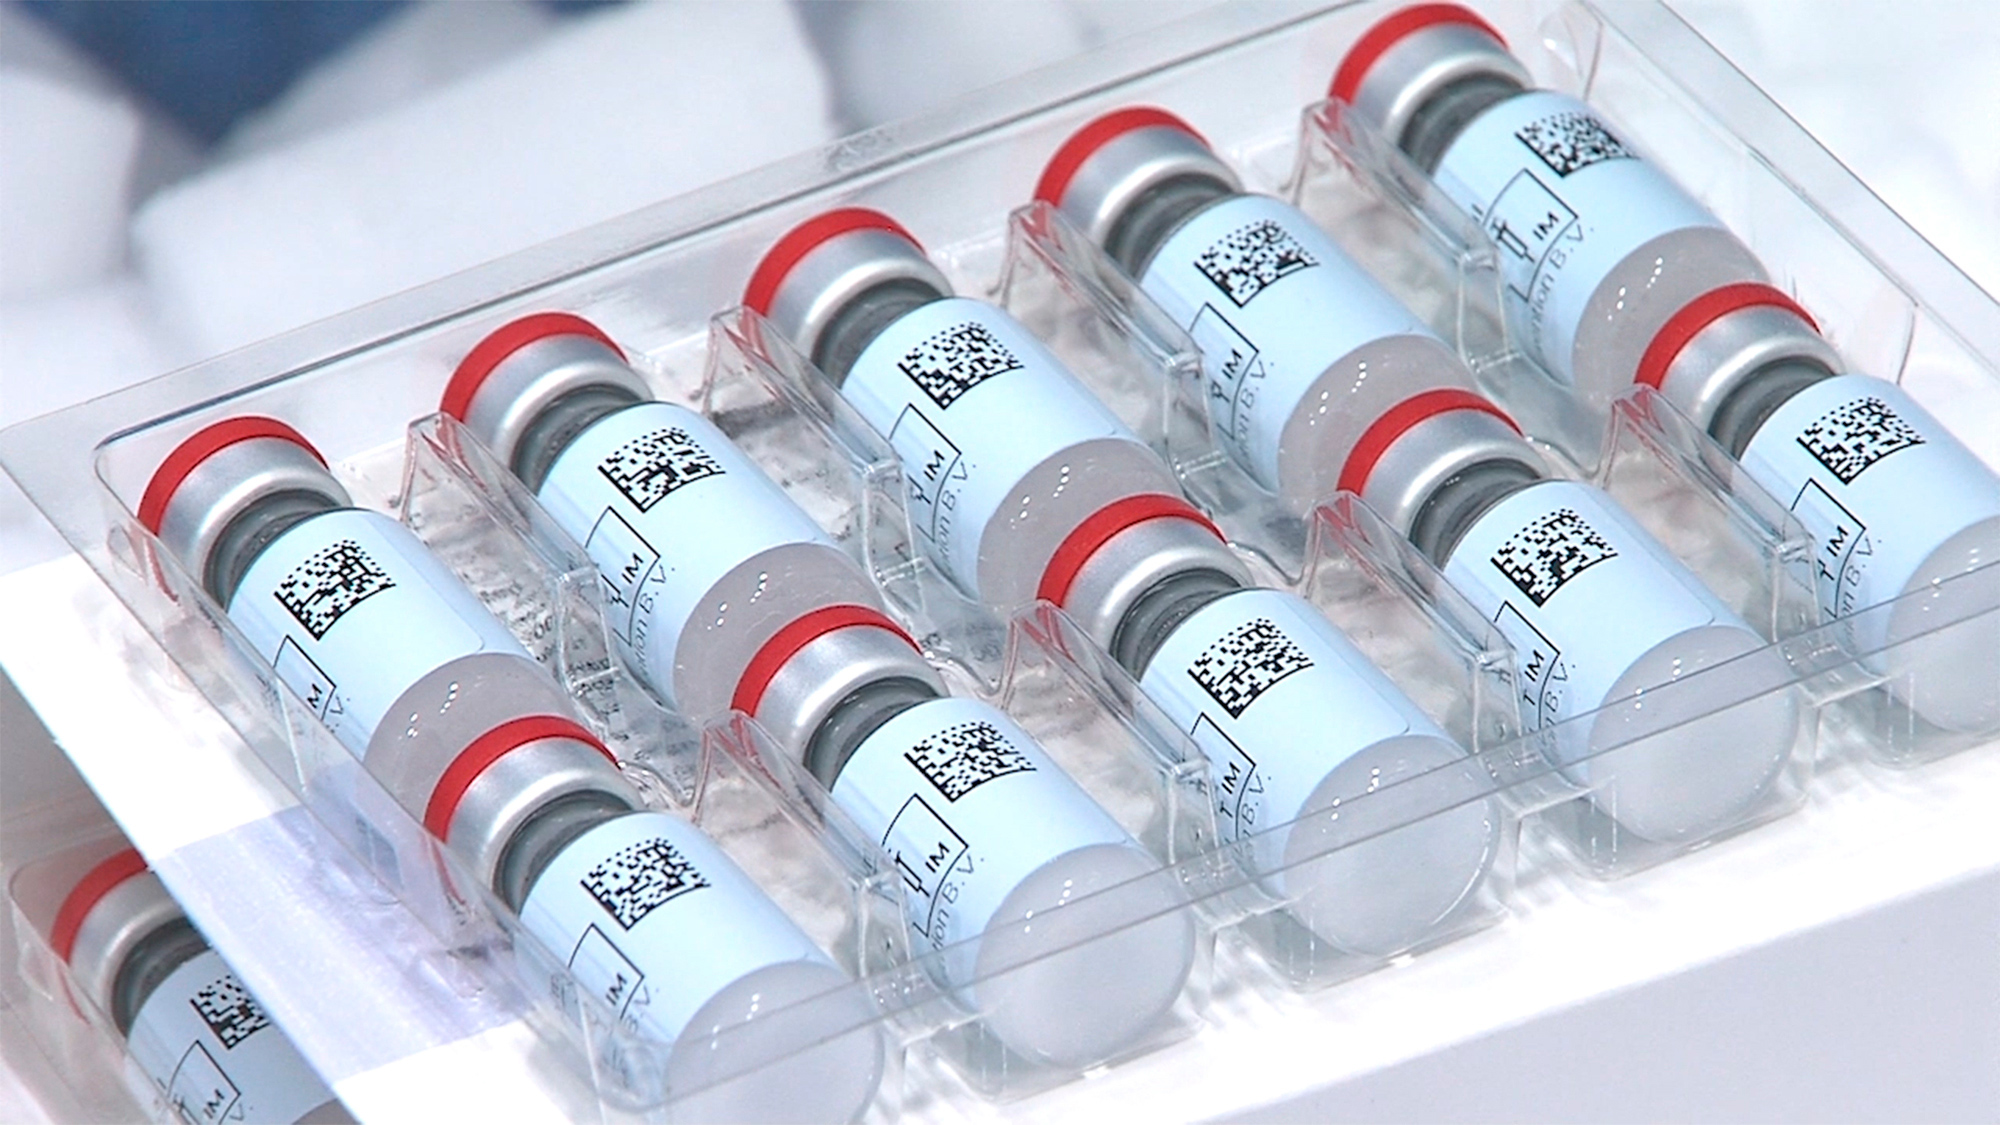 This Dec. 2, 2020 photo provided by Johnson & Johnson shows vials of the COVID-19 vaccine in the United States.